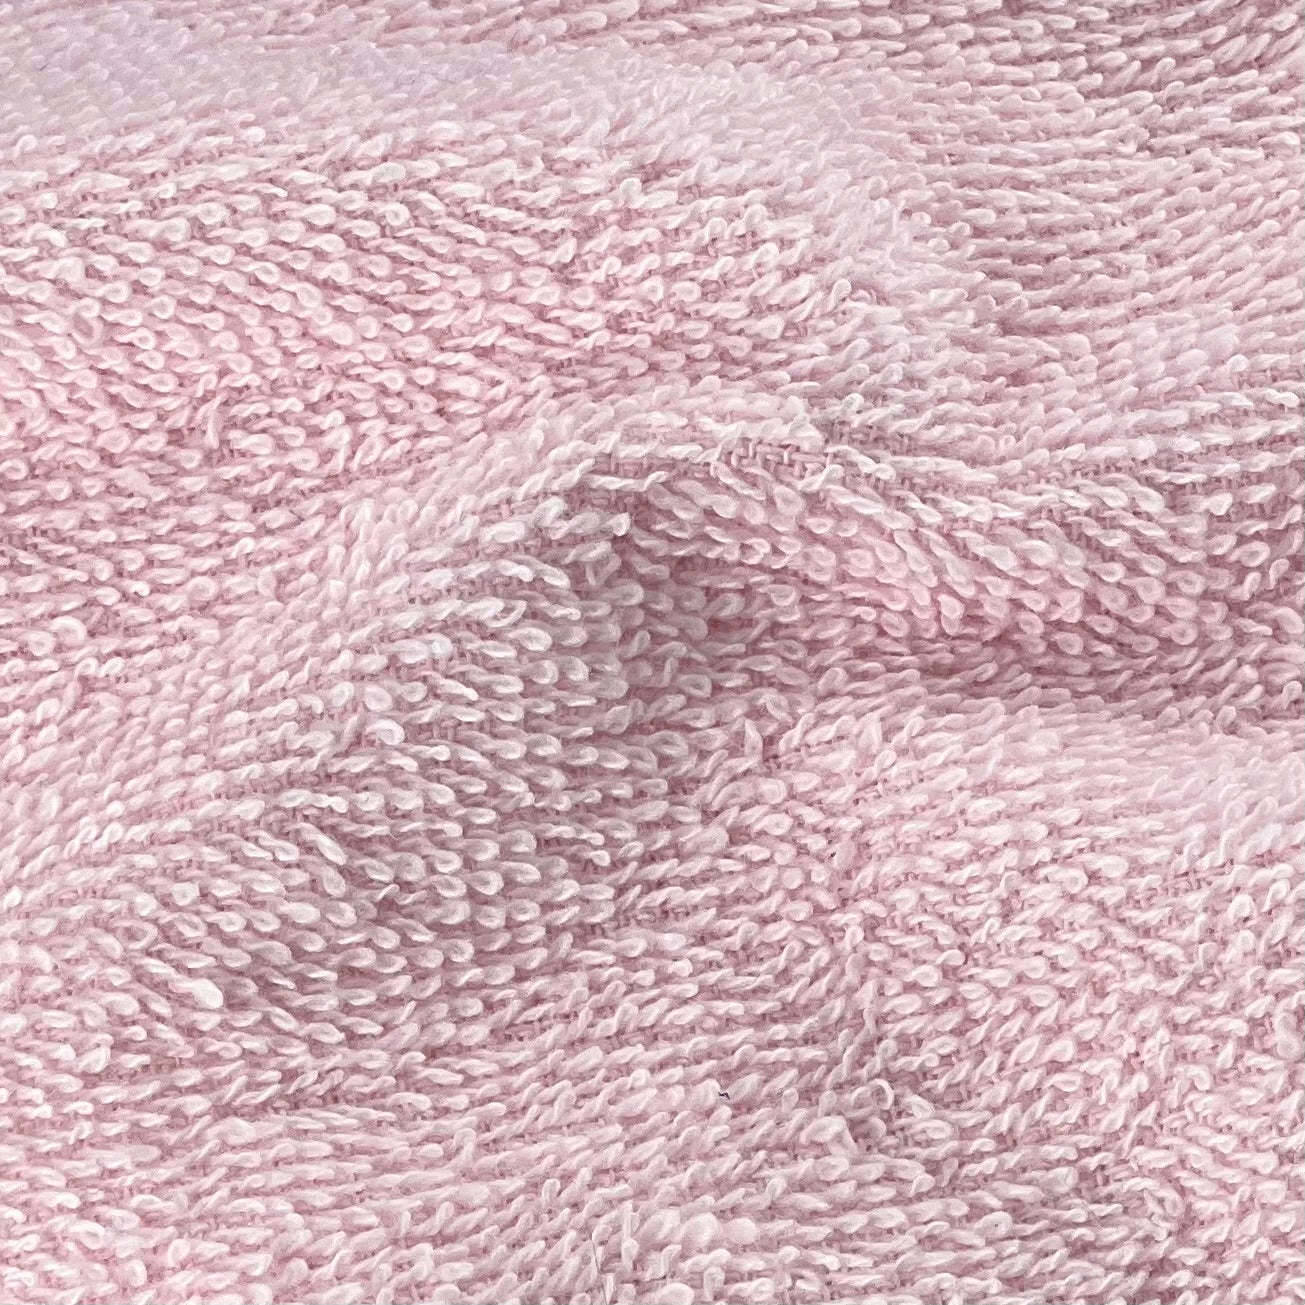 Terry Cloth Fabric 100% Cotton 45 Wide (11oz) by The Yard (Pink)